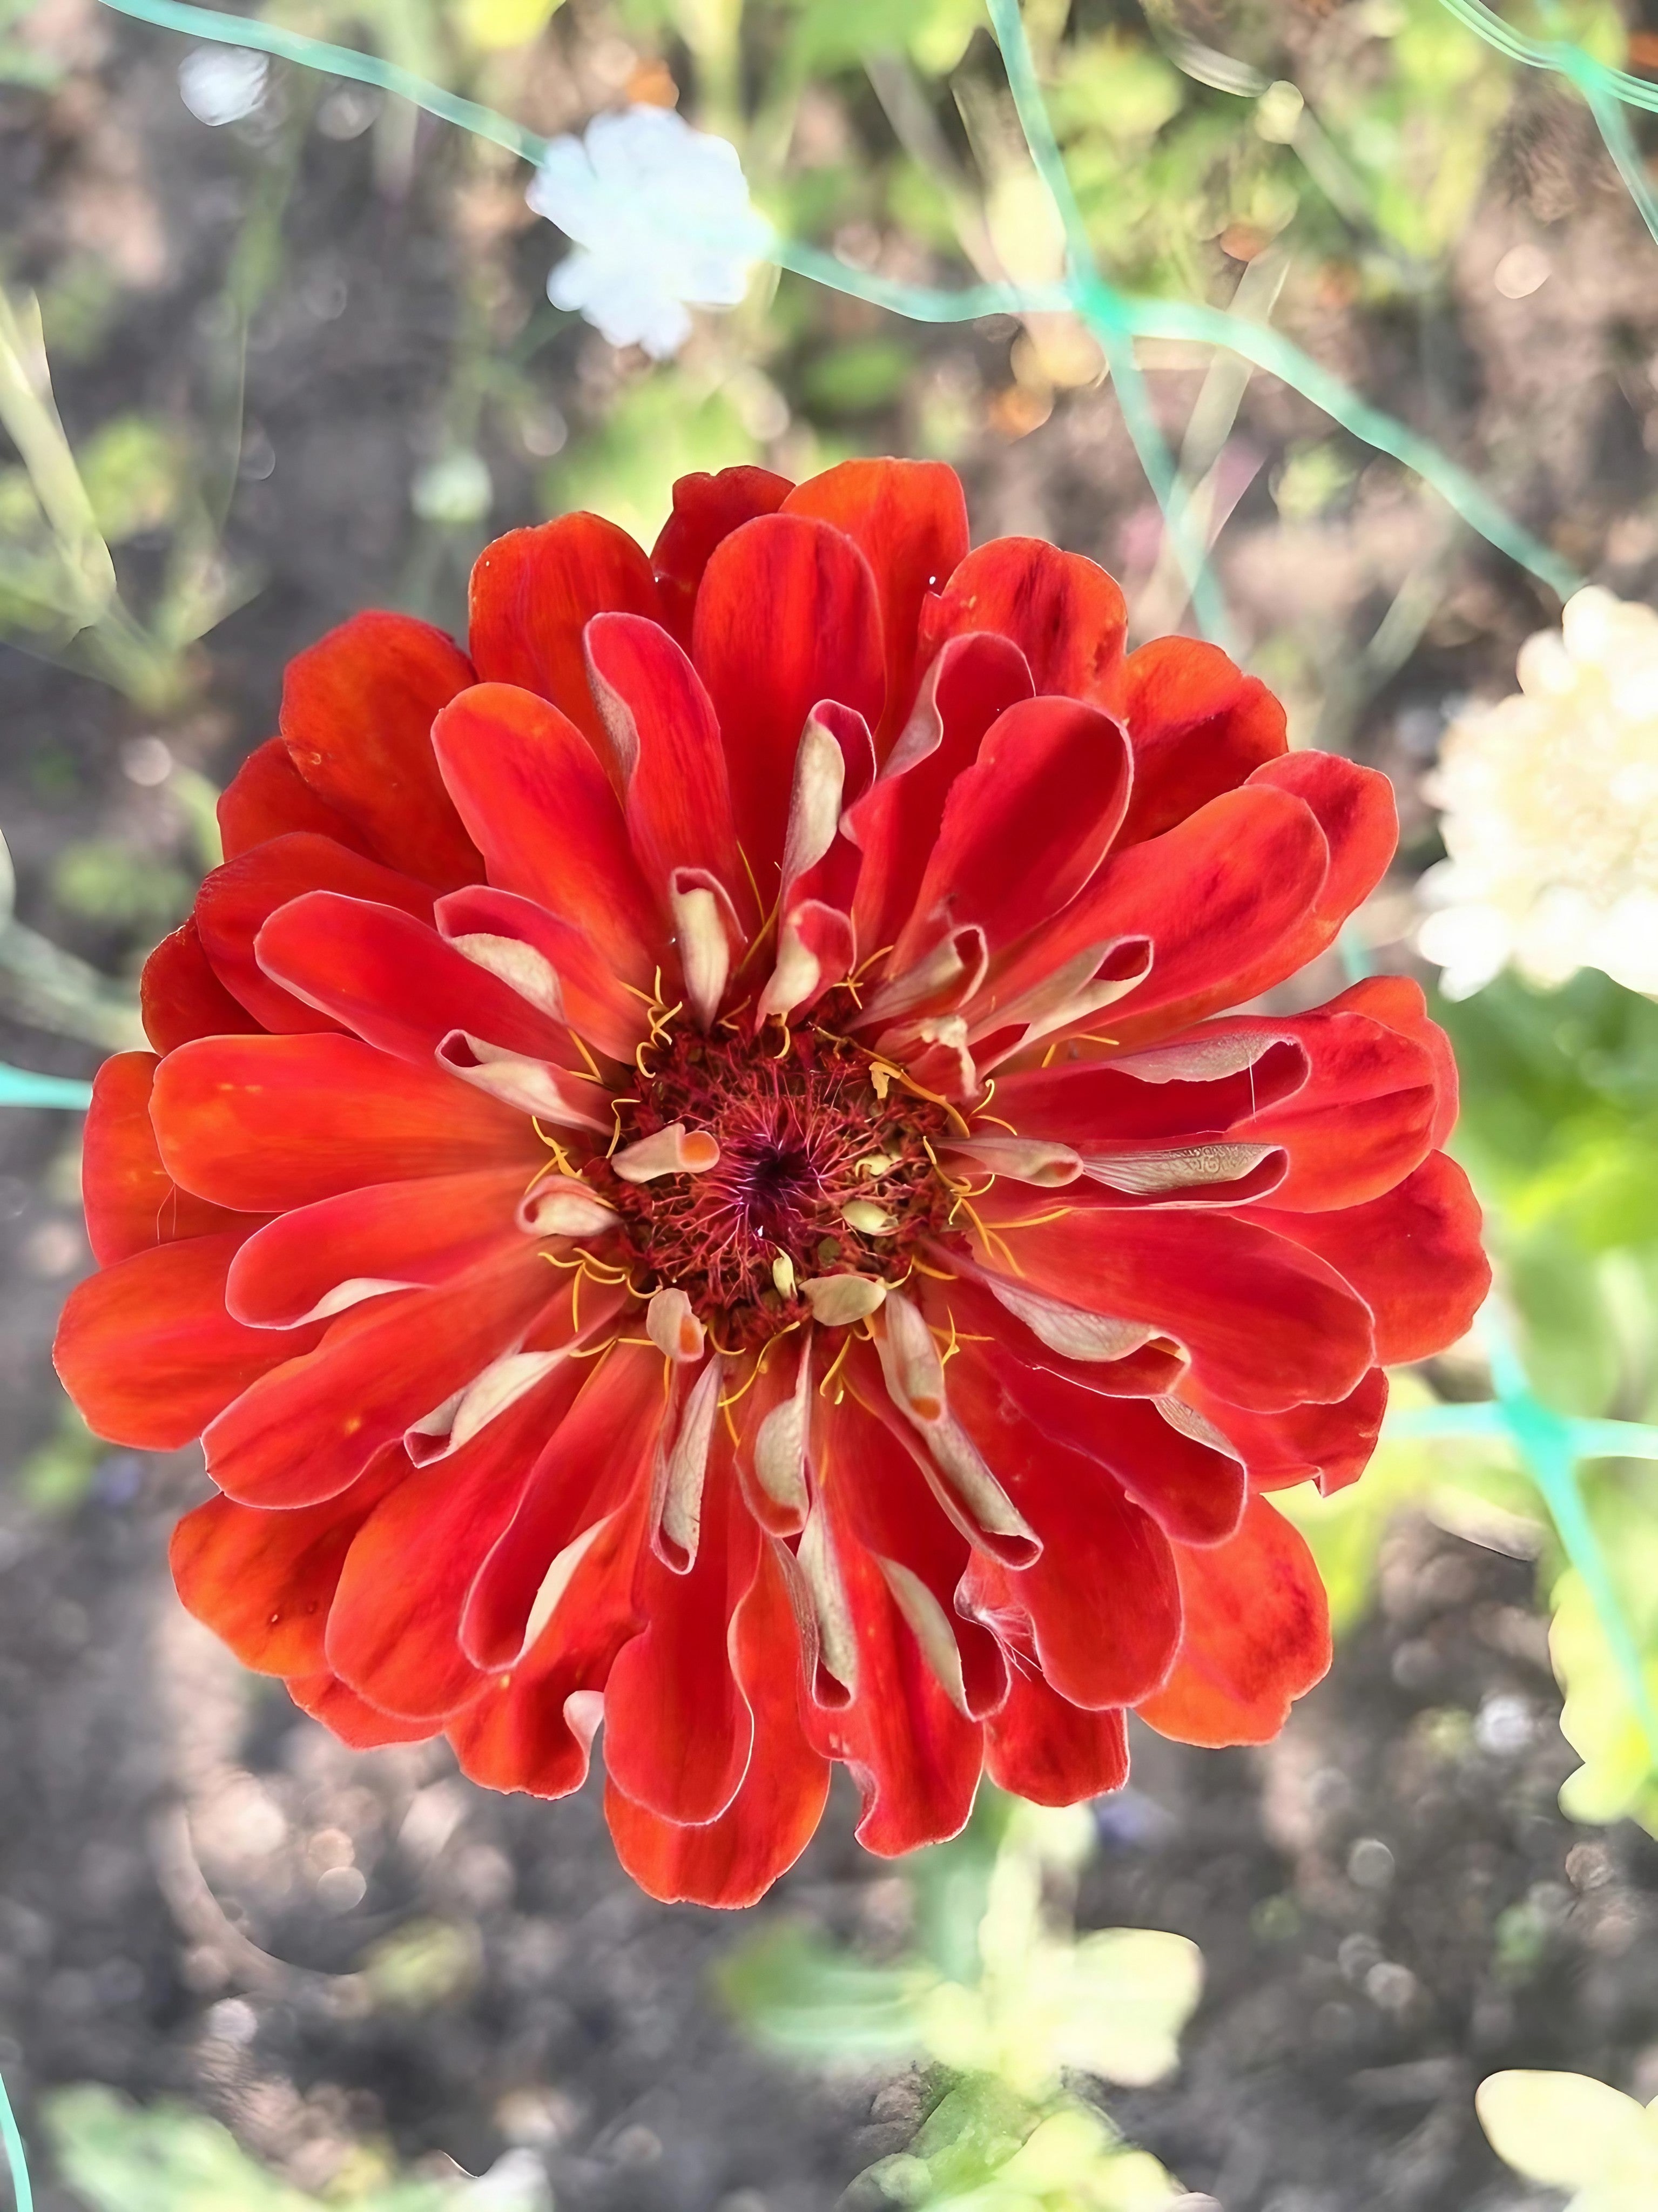 Close-up of a Zinnia Giants of California flower with vibrant red petals and a prominent yellow center